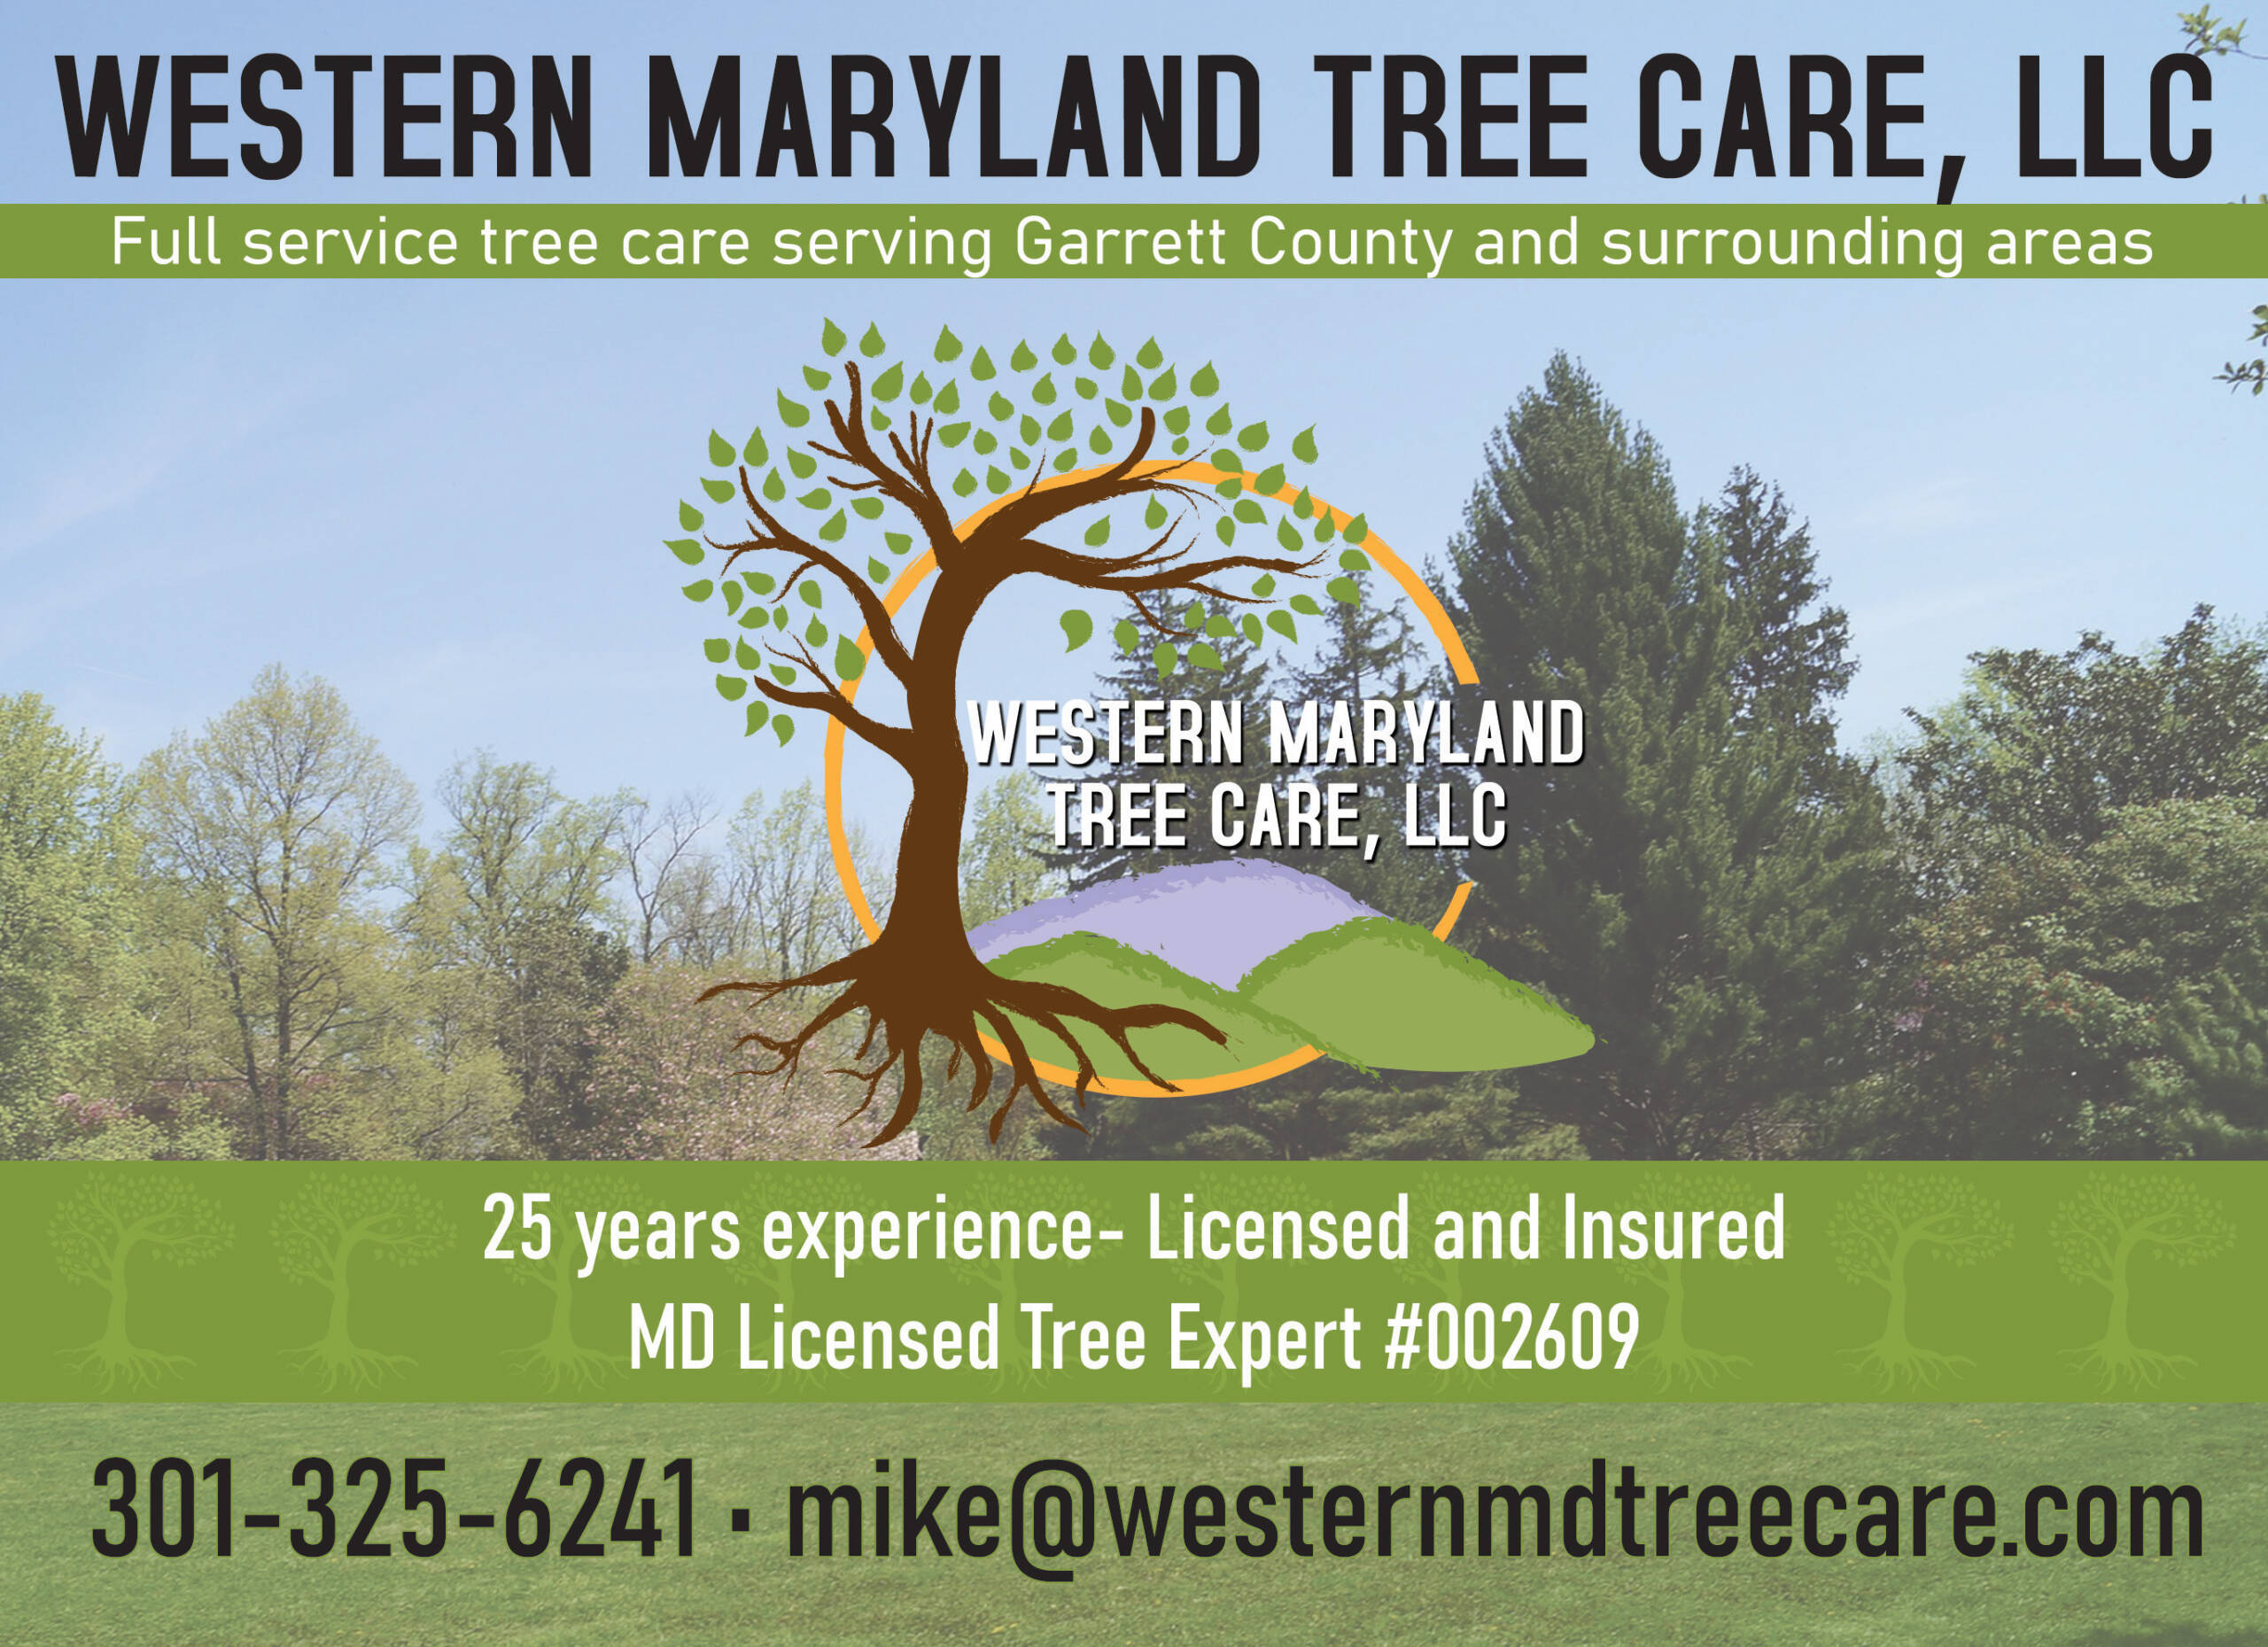 Western Maryland Tree Care, LLC - Full service tree care serving Garrett County and surrounding areas - 25 years experience - Licensed and Insured - MD Licensed Tree Expert #002609 - 301-325-6241 - mike@westernmdtreecare.com